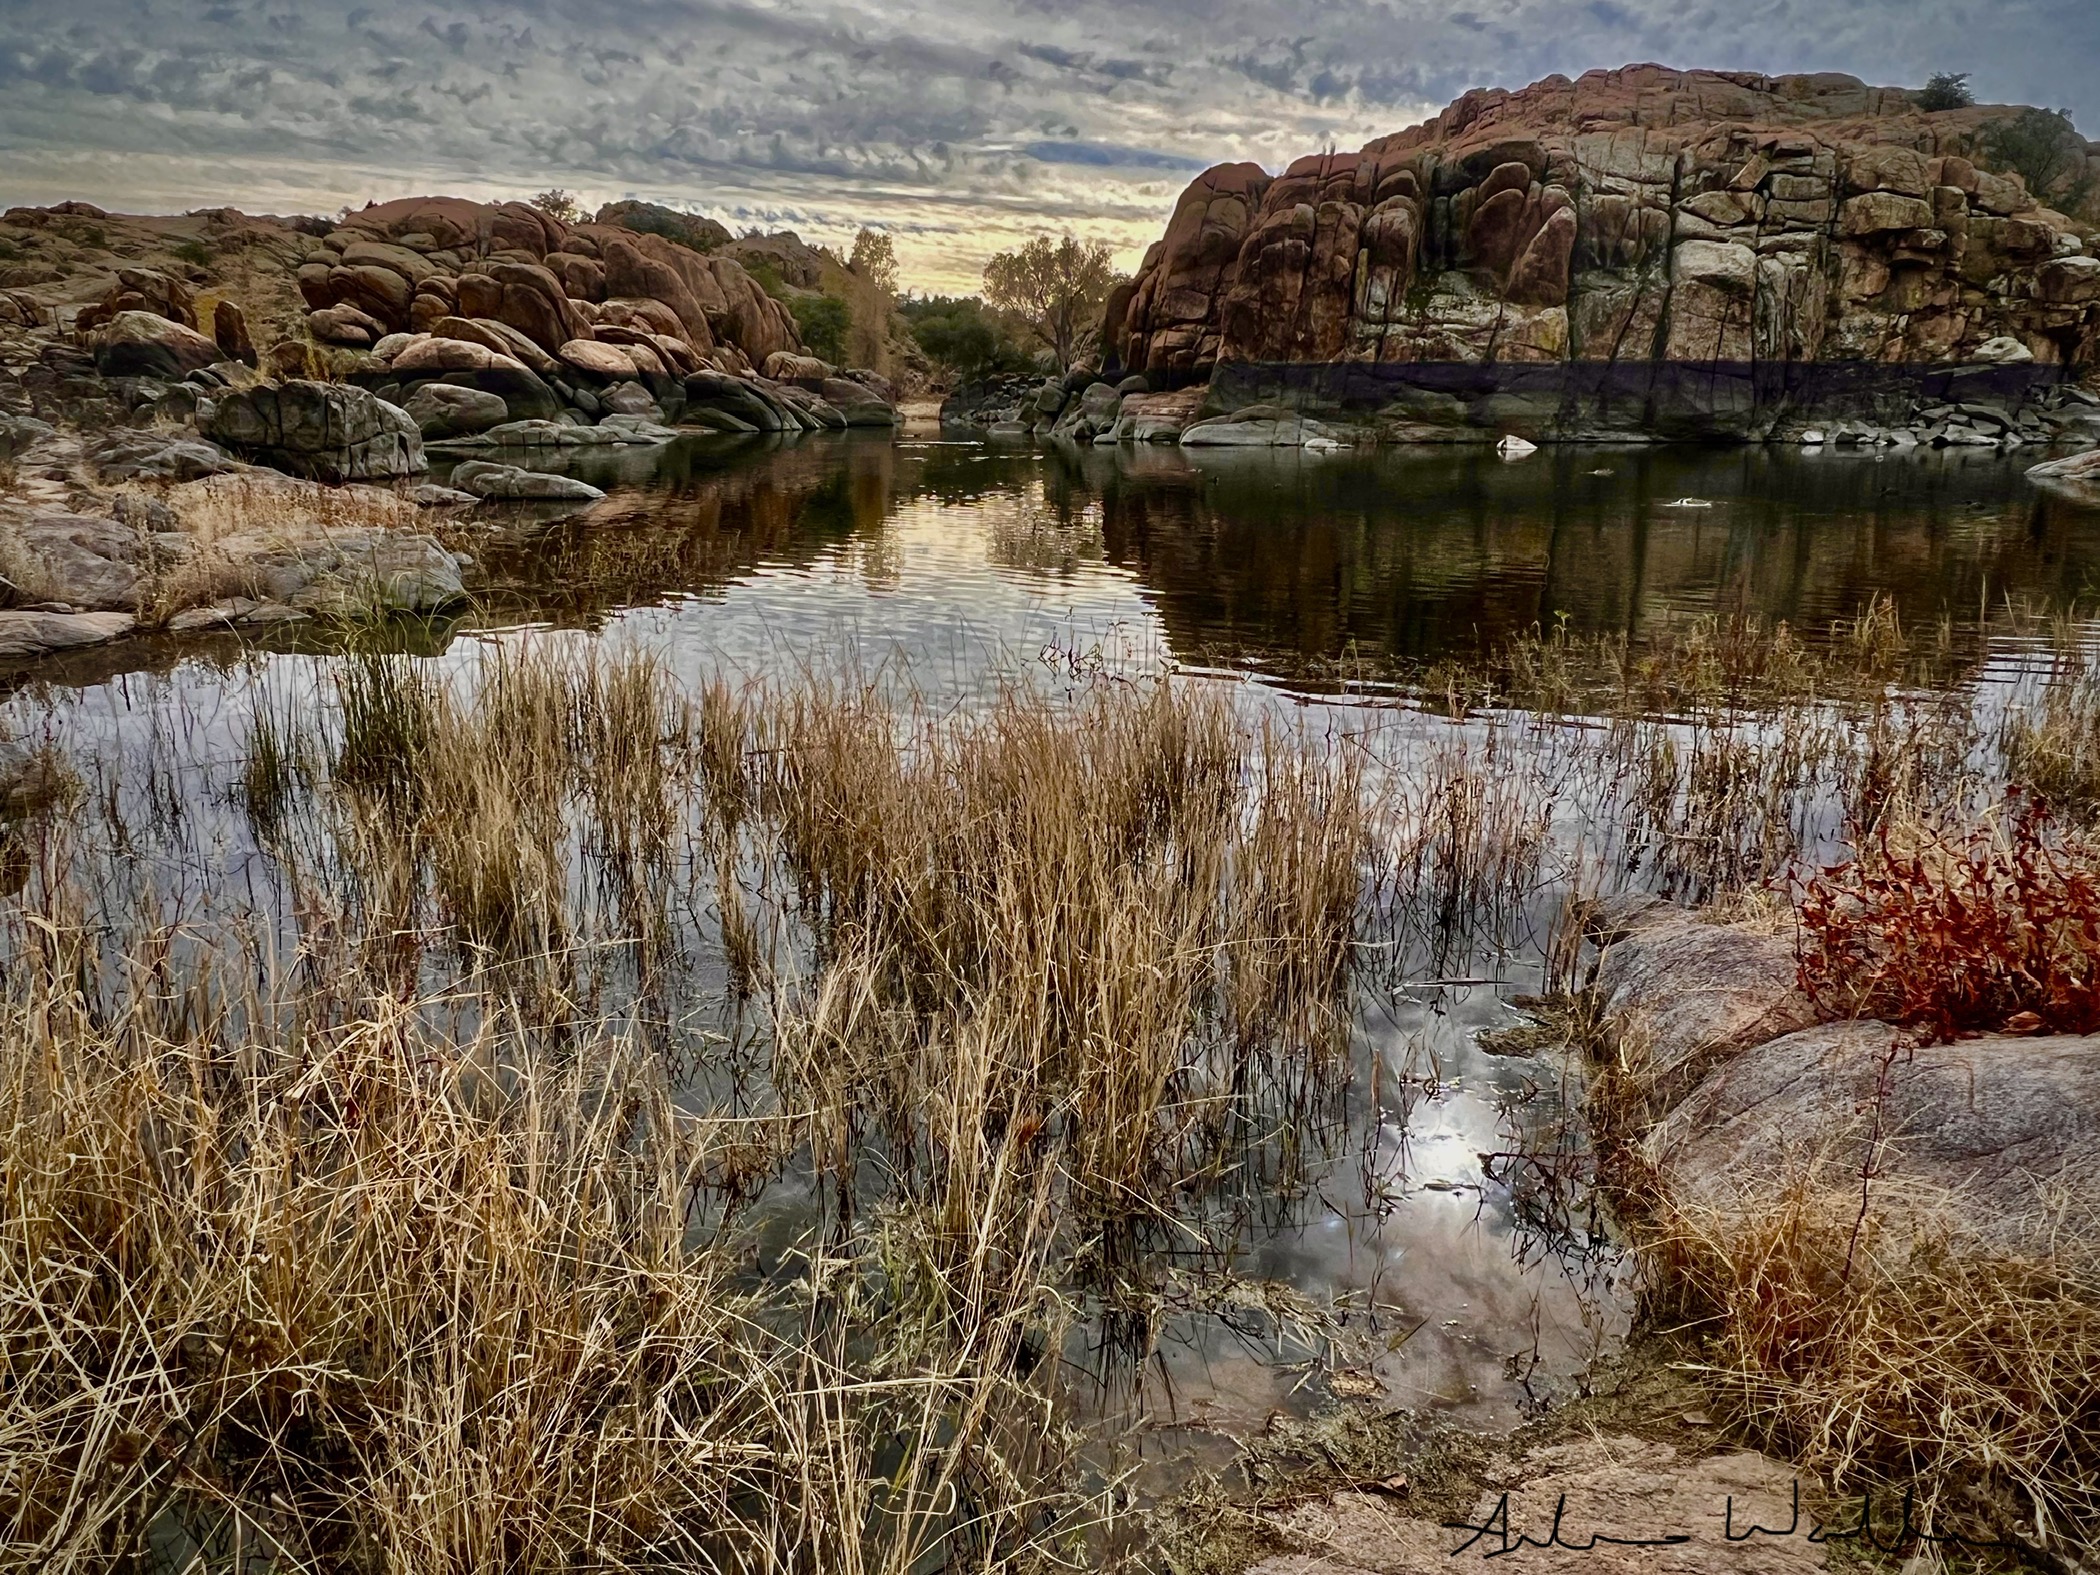 Photo by Arlene Waller  |  This image was captured on the Willow Lake Trail in the Granite Dells area of Prescott.